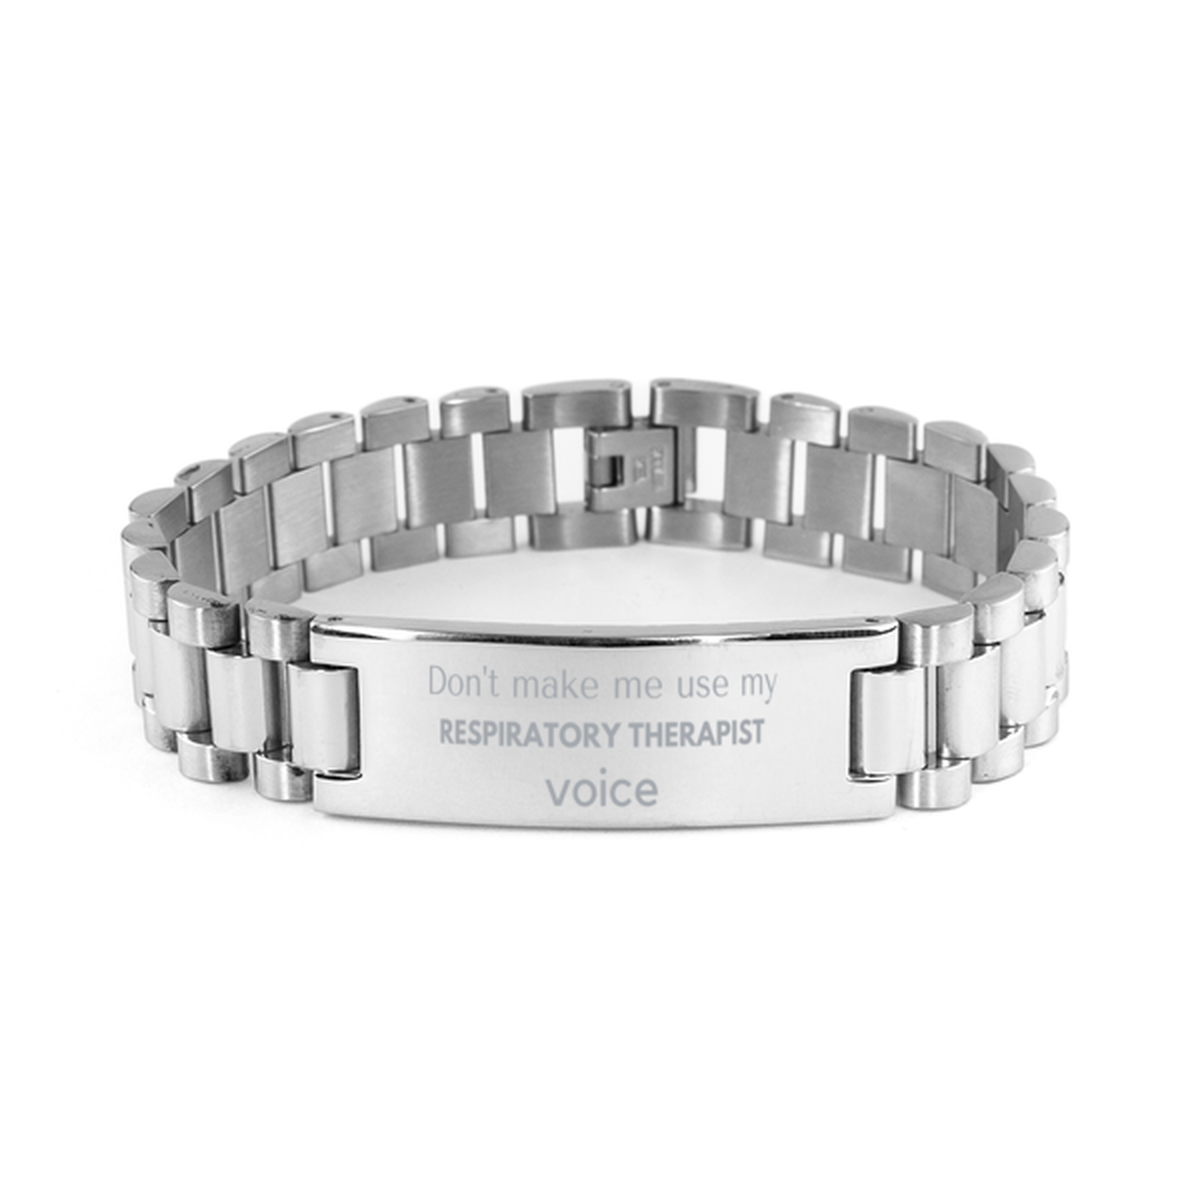 Don't make me use my Respiratory Therapist voice, Sarcasm Respiratory Therapist Gifts, Christmas Respiratory Therapist Ladder Stainless Steel Bracelet Birthday Unique Gifts For Respiratory Therapist Coworkers, Men, Women, Colleague, Friends